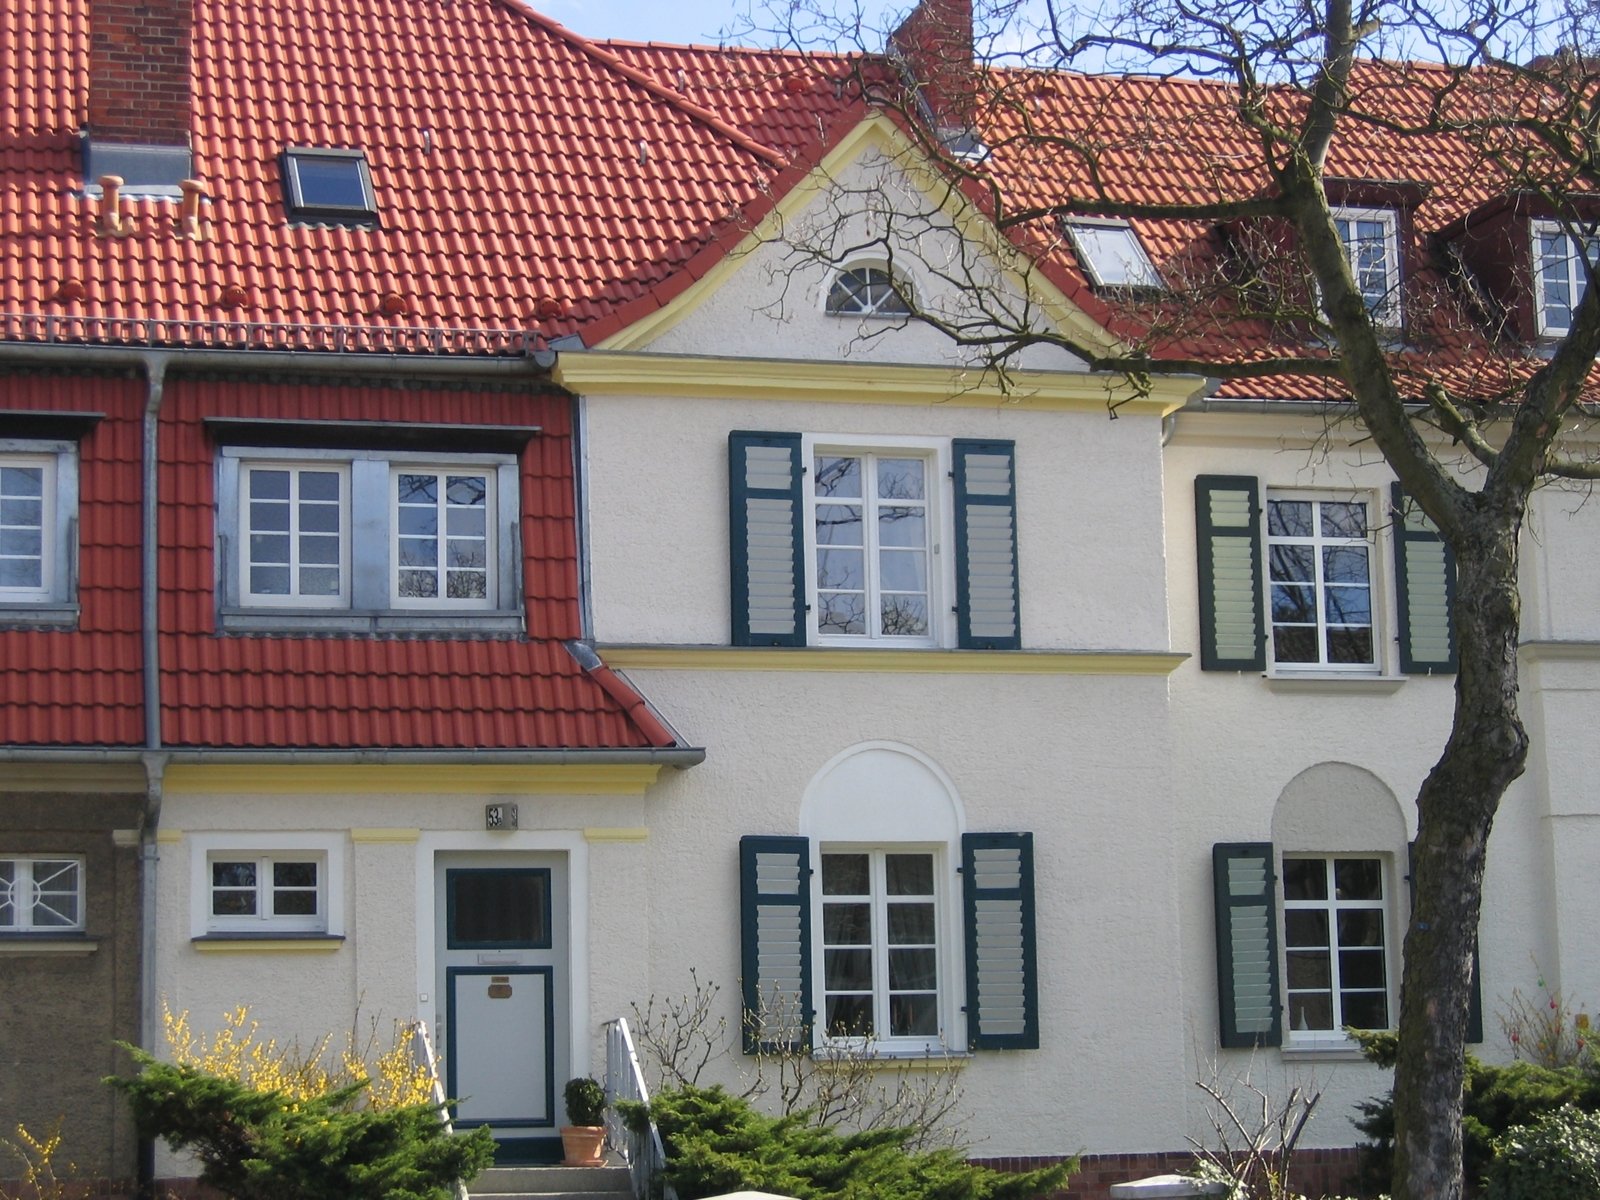 this old house is one of the few remaining houses with beautiful red and white tiled roofs